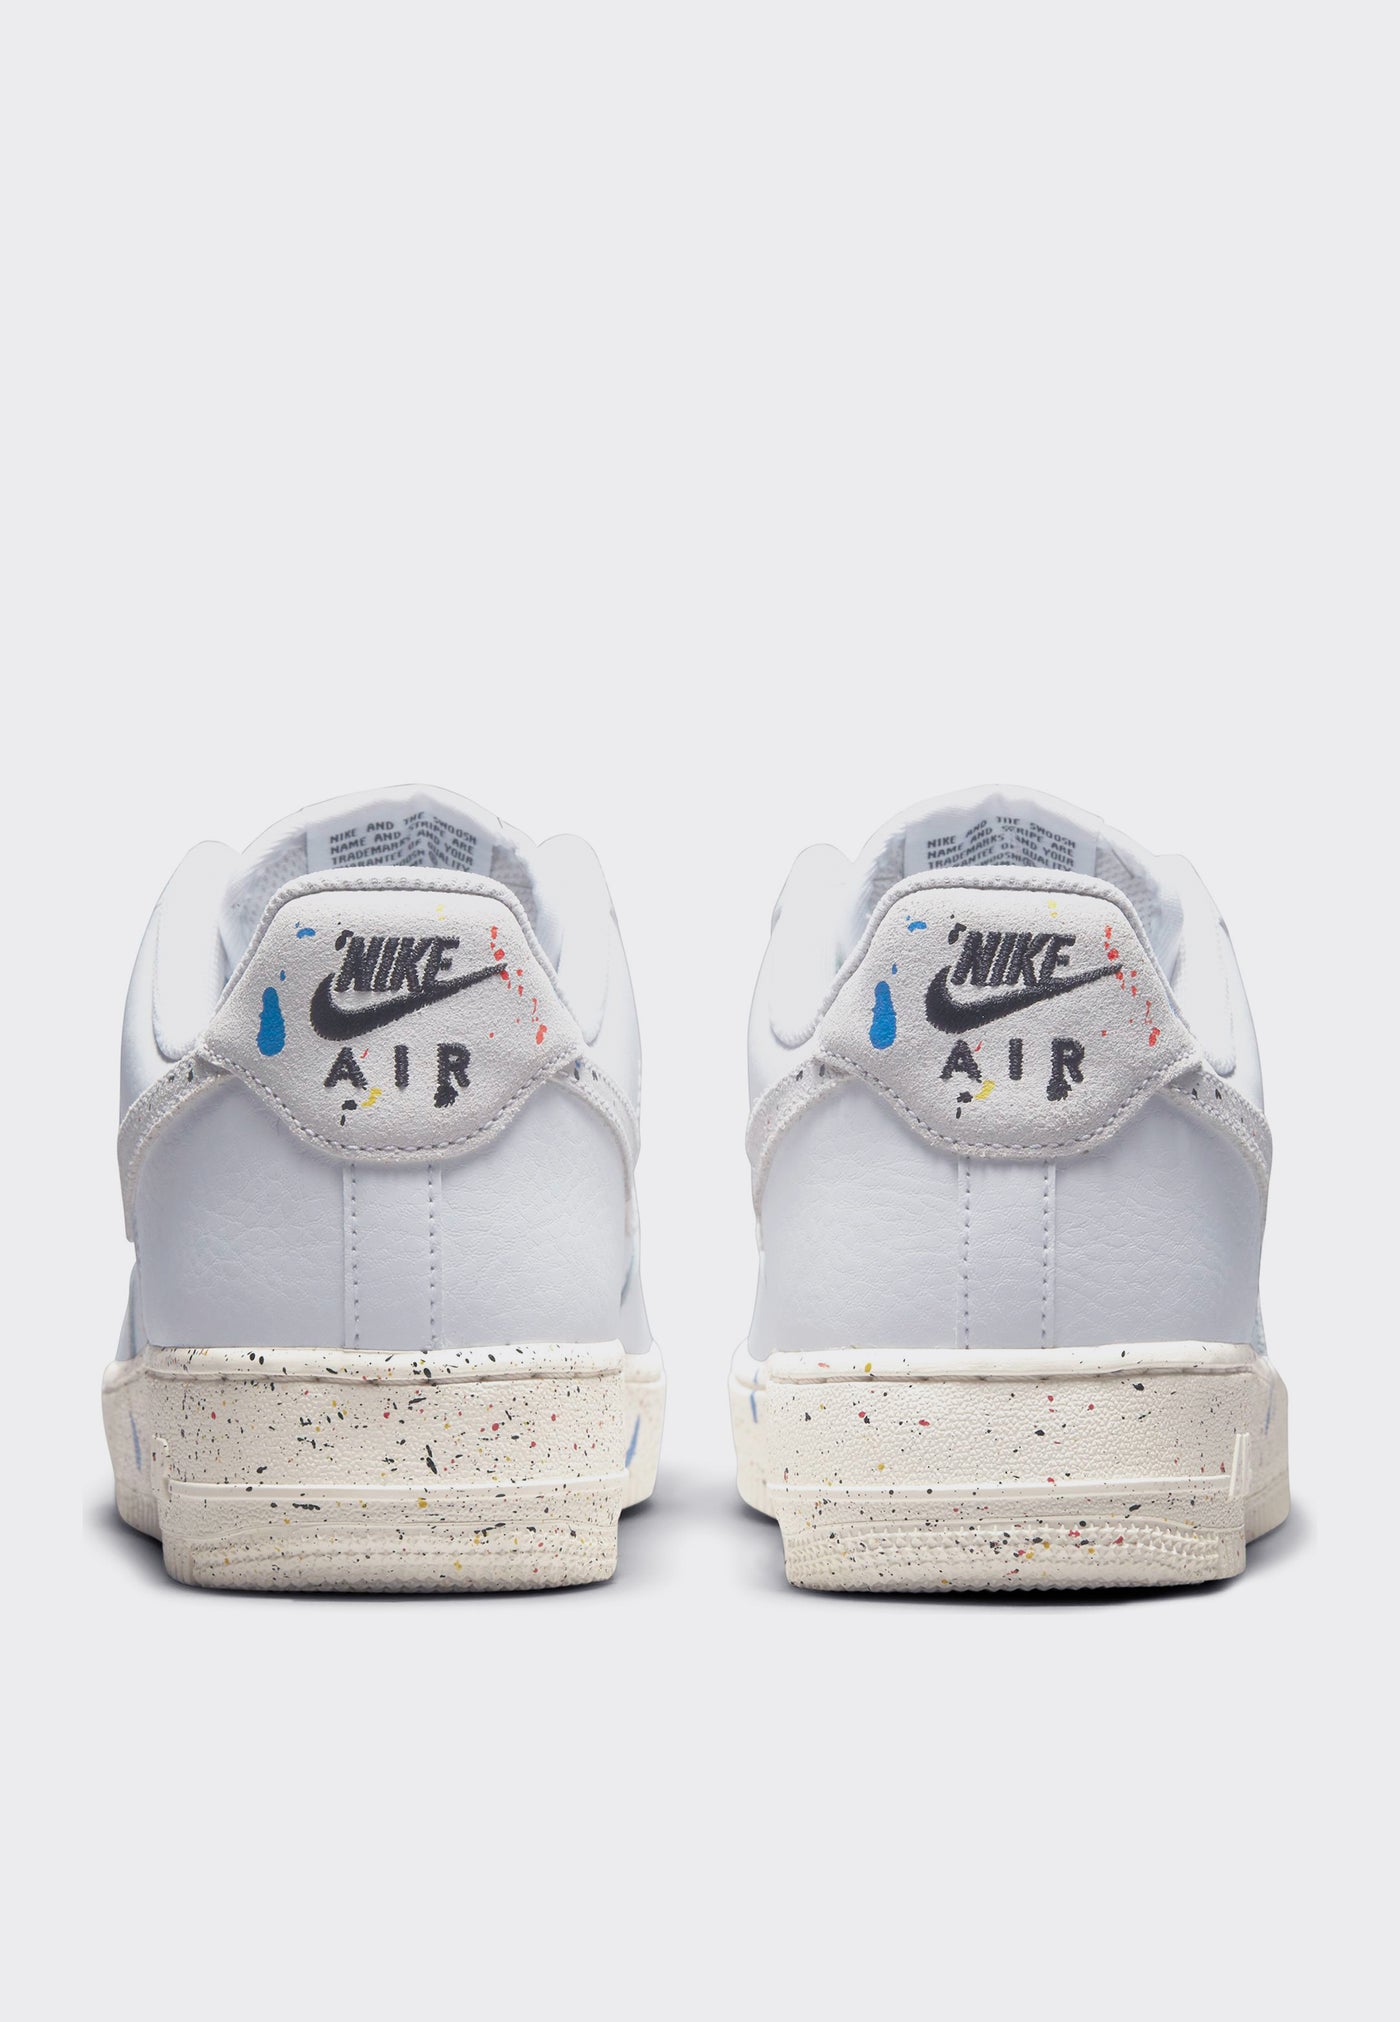 Size 11 - Nike Air Force 1 Low '07 LV8 Paint Splatter White